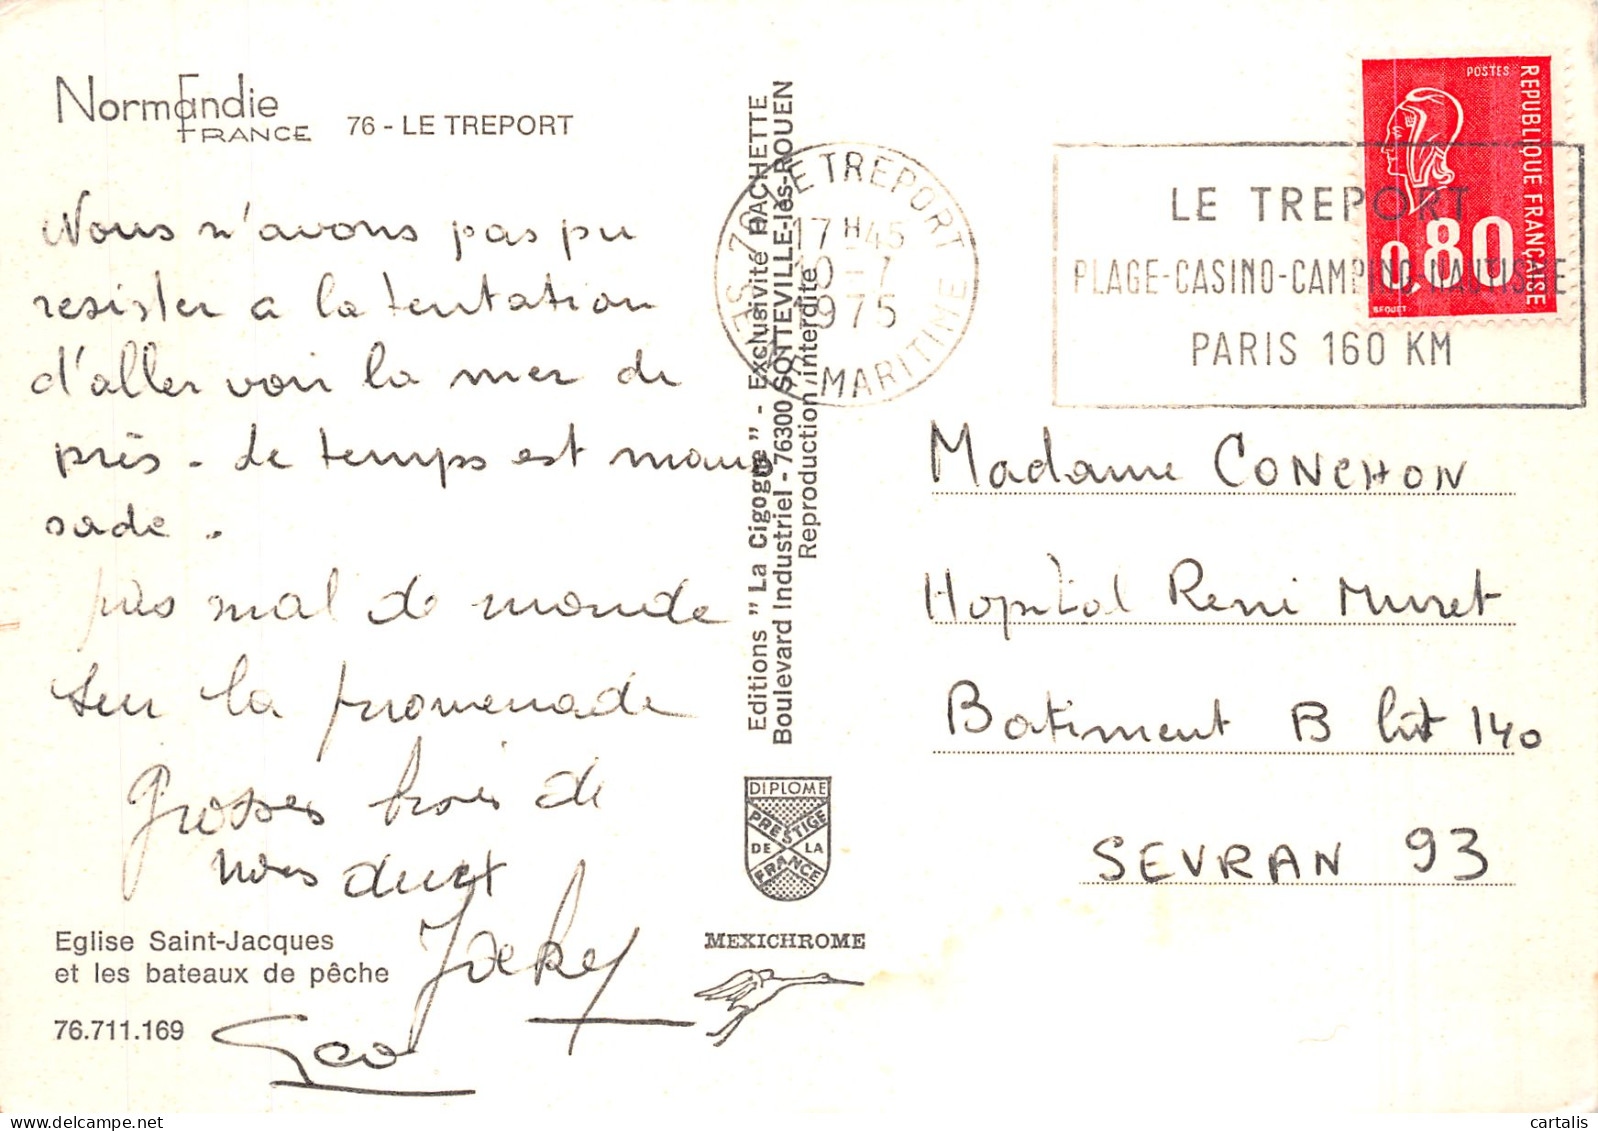 76-LE TREPORT-N° 4422-A/0217 - Le Treport